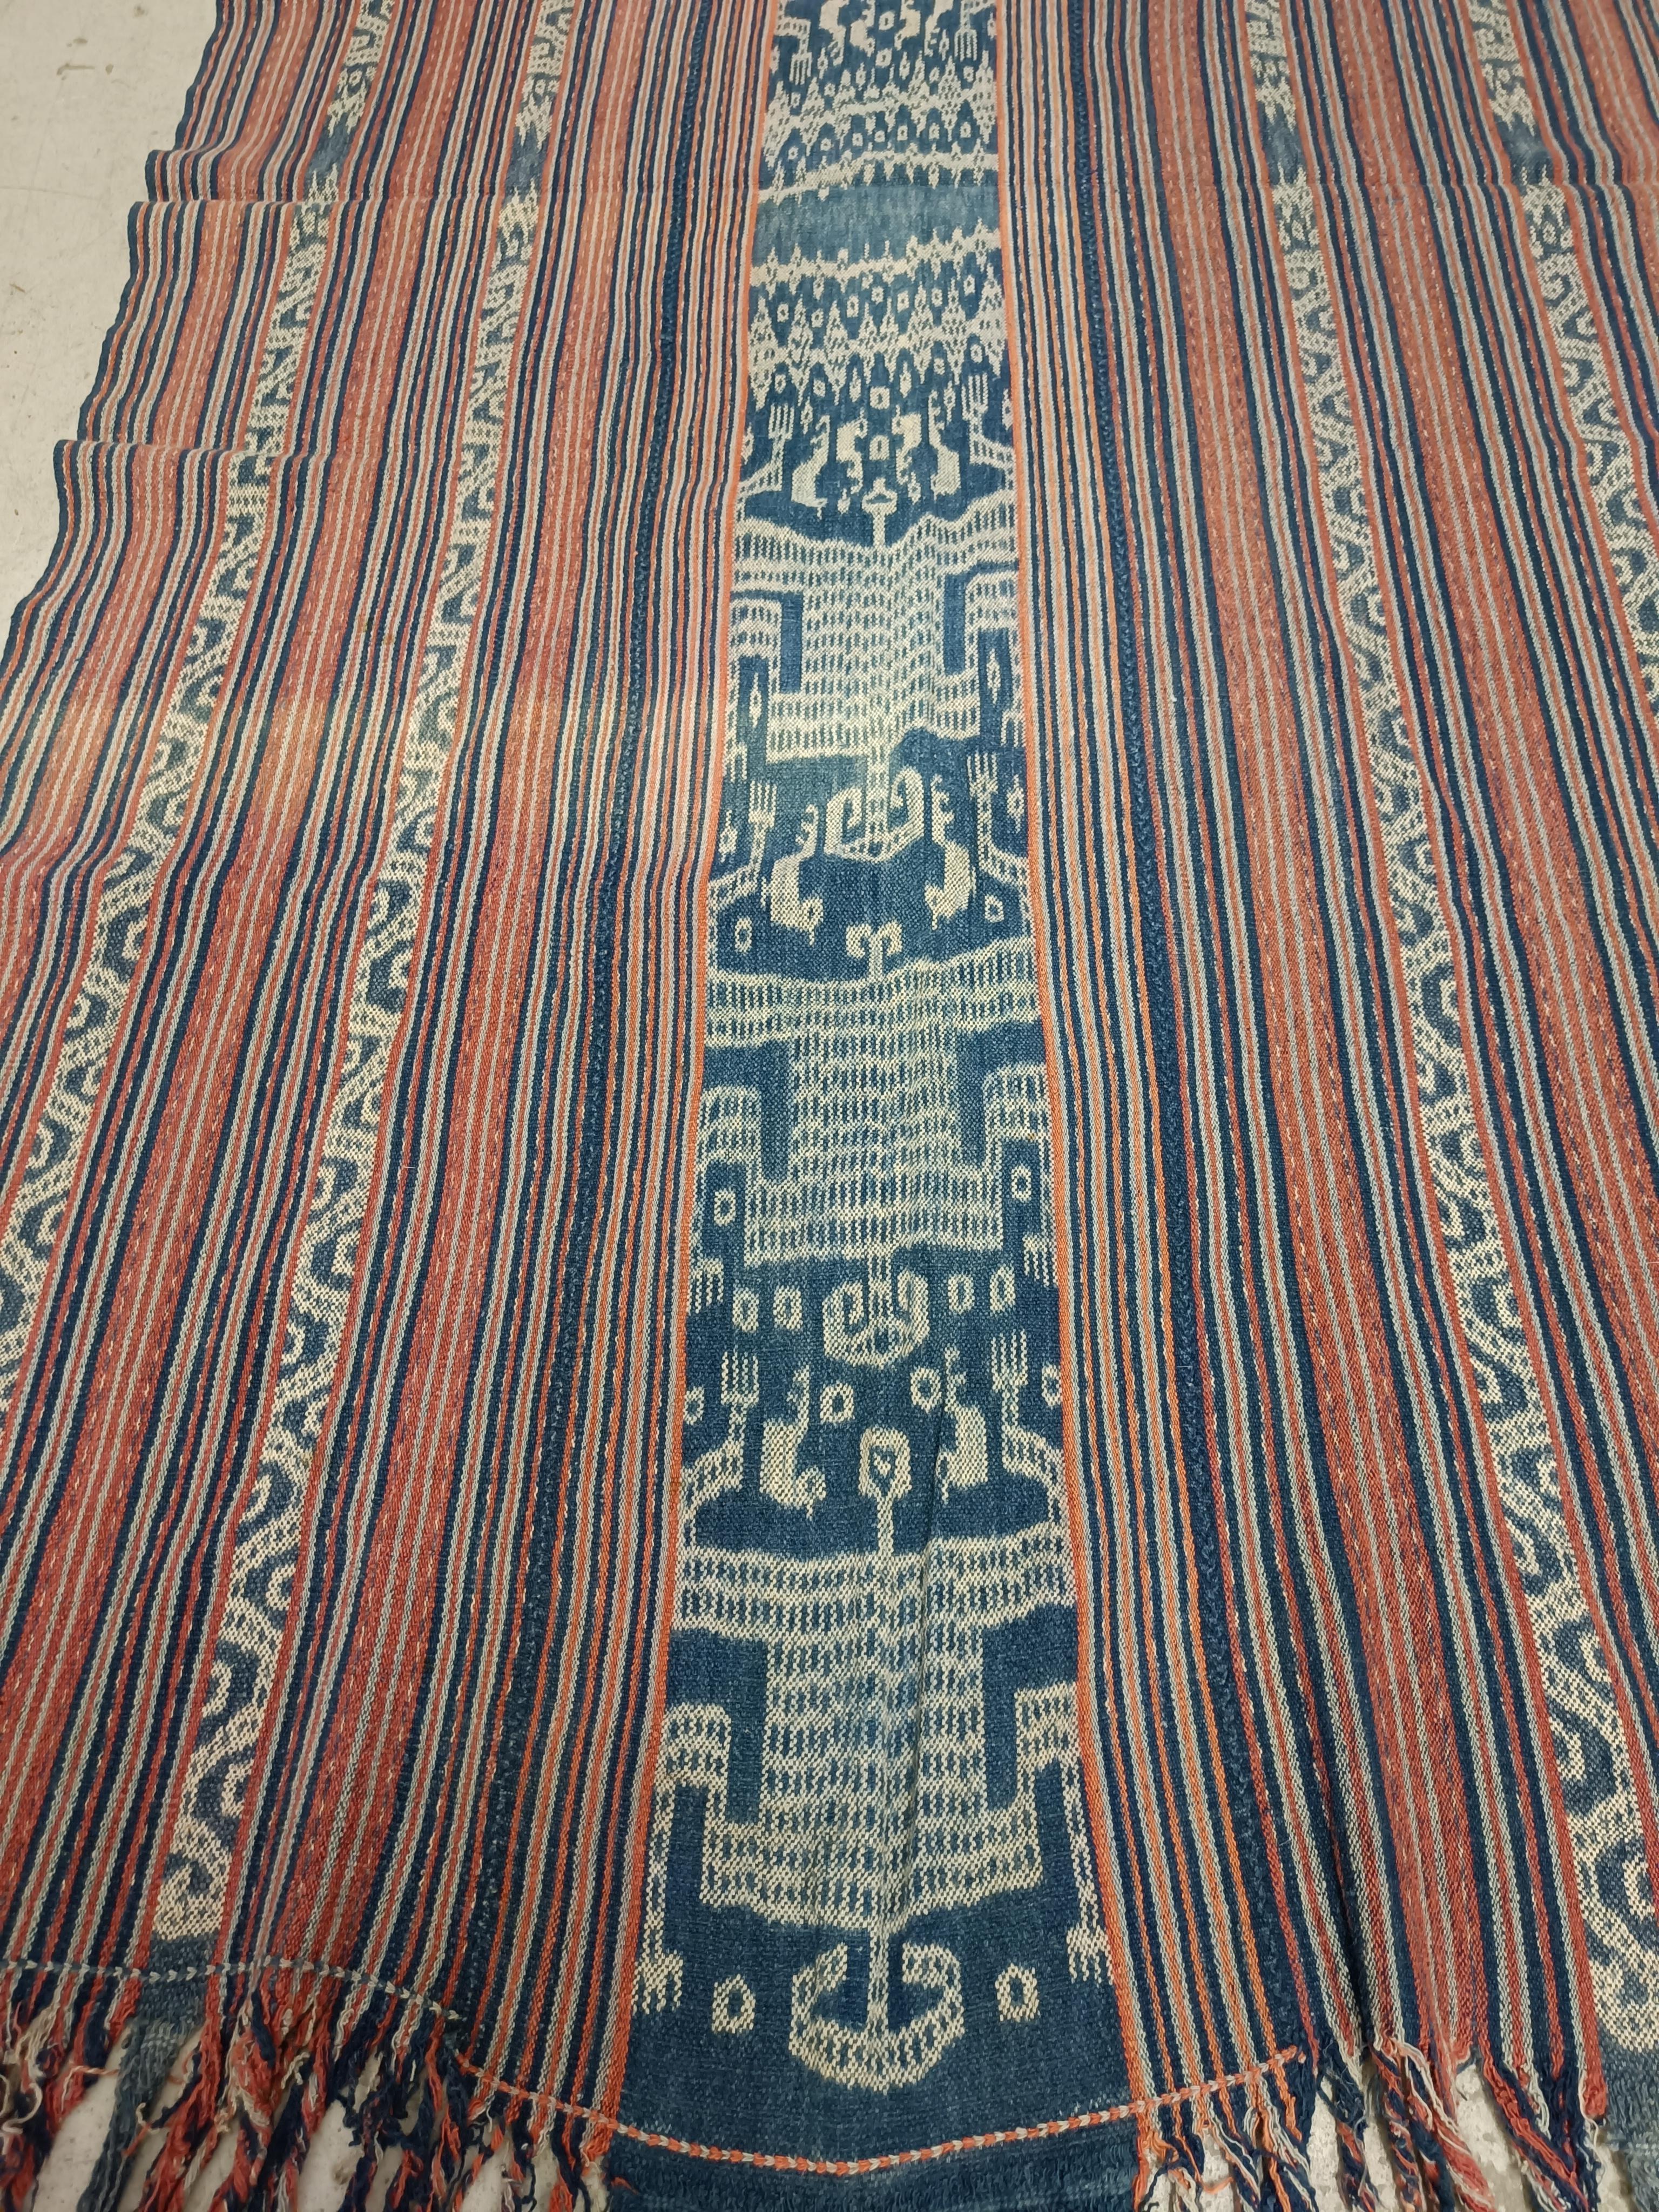 Woven Vintage Ikat Cloth Timor Indonesia Asian Textiles Home Decor For Sale